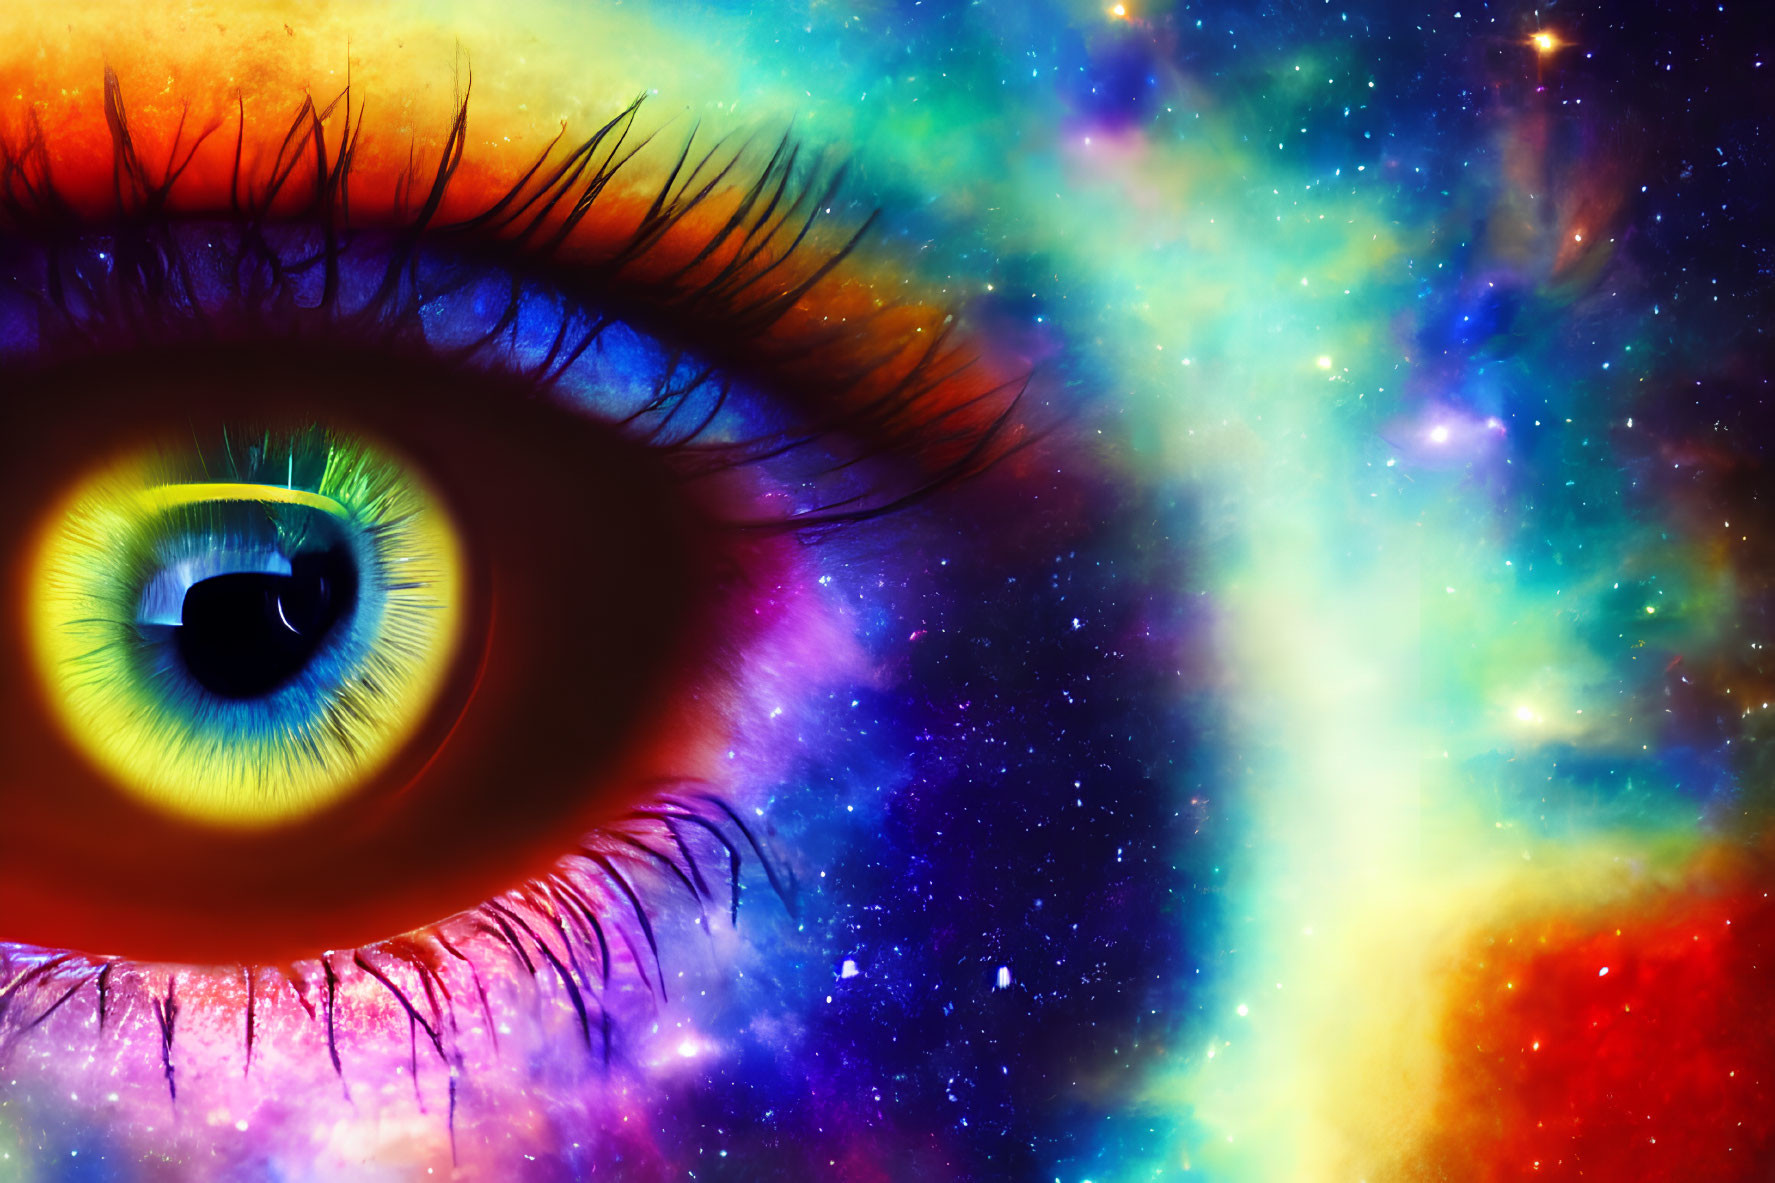 Close-up eye with cosmic nebula overlay for surreal universe representation